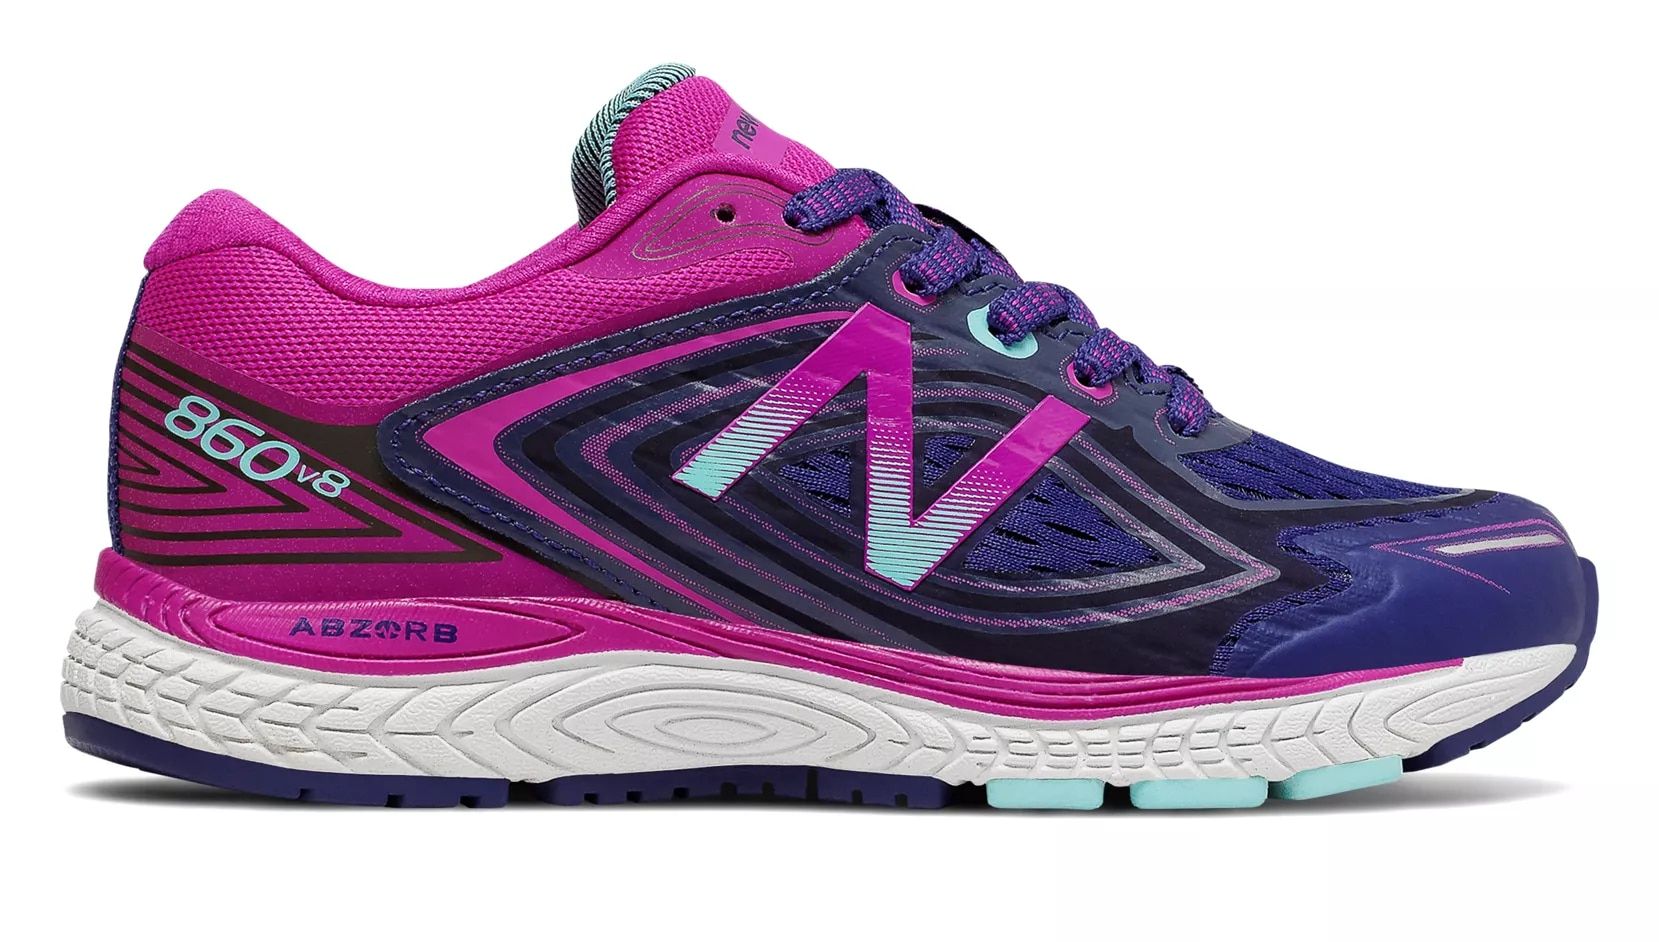 Kids Running Shoes - The New Balance 860v8 Offers Stability